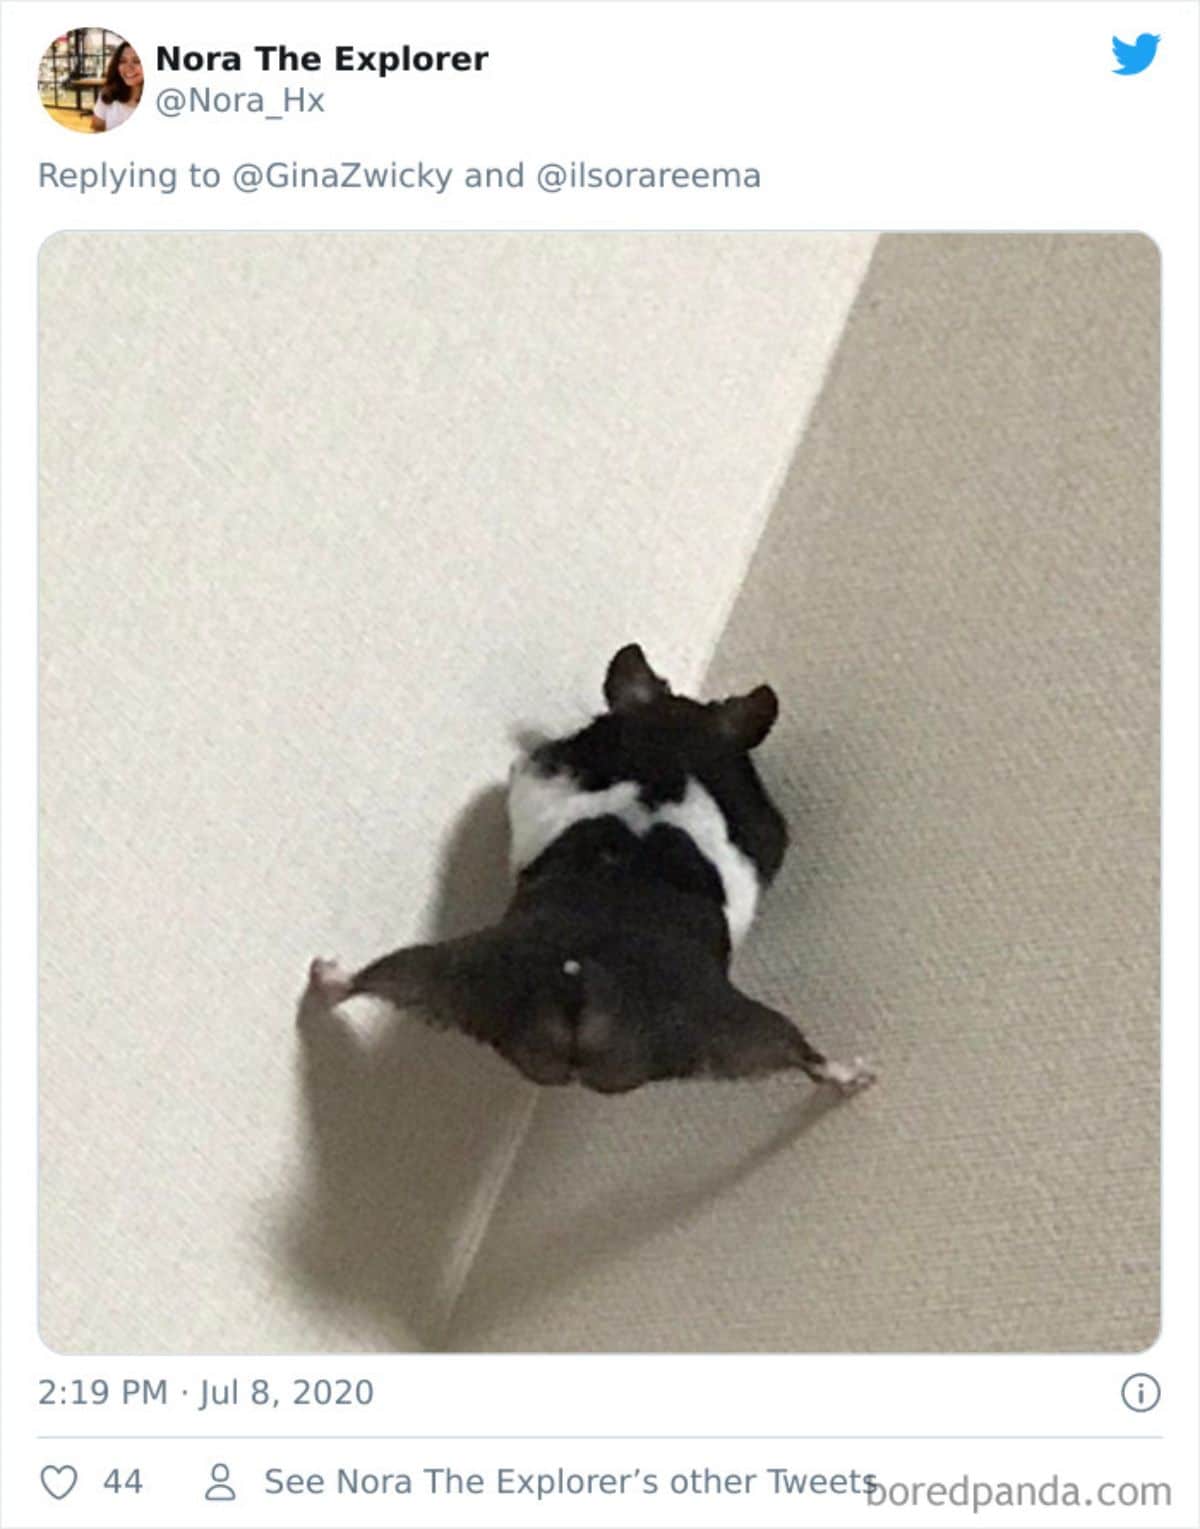 tweet of a black and white hamster on a white sofa with its back legs stretch out on either side